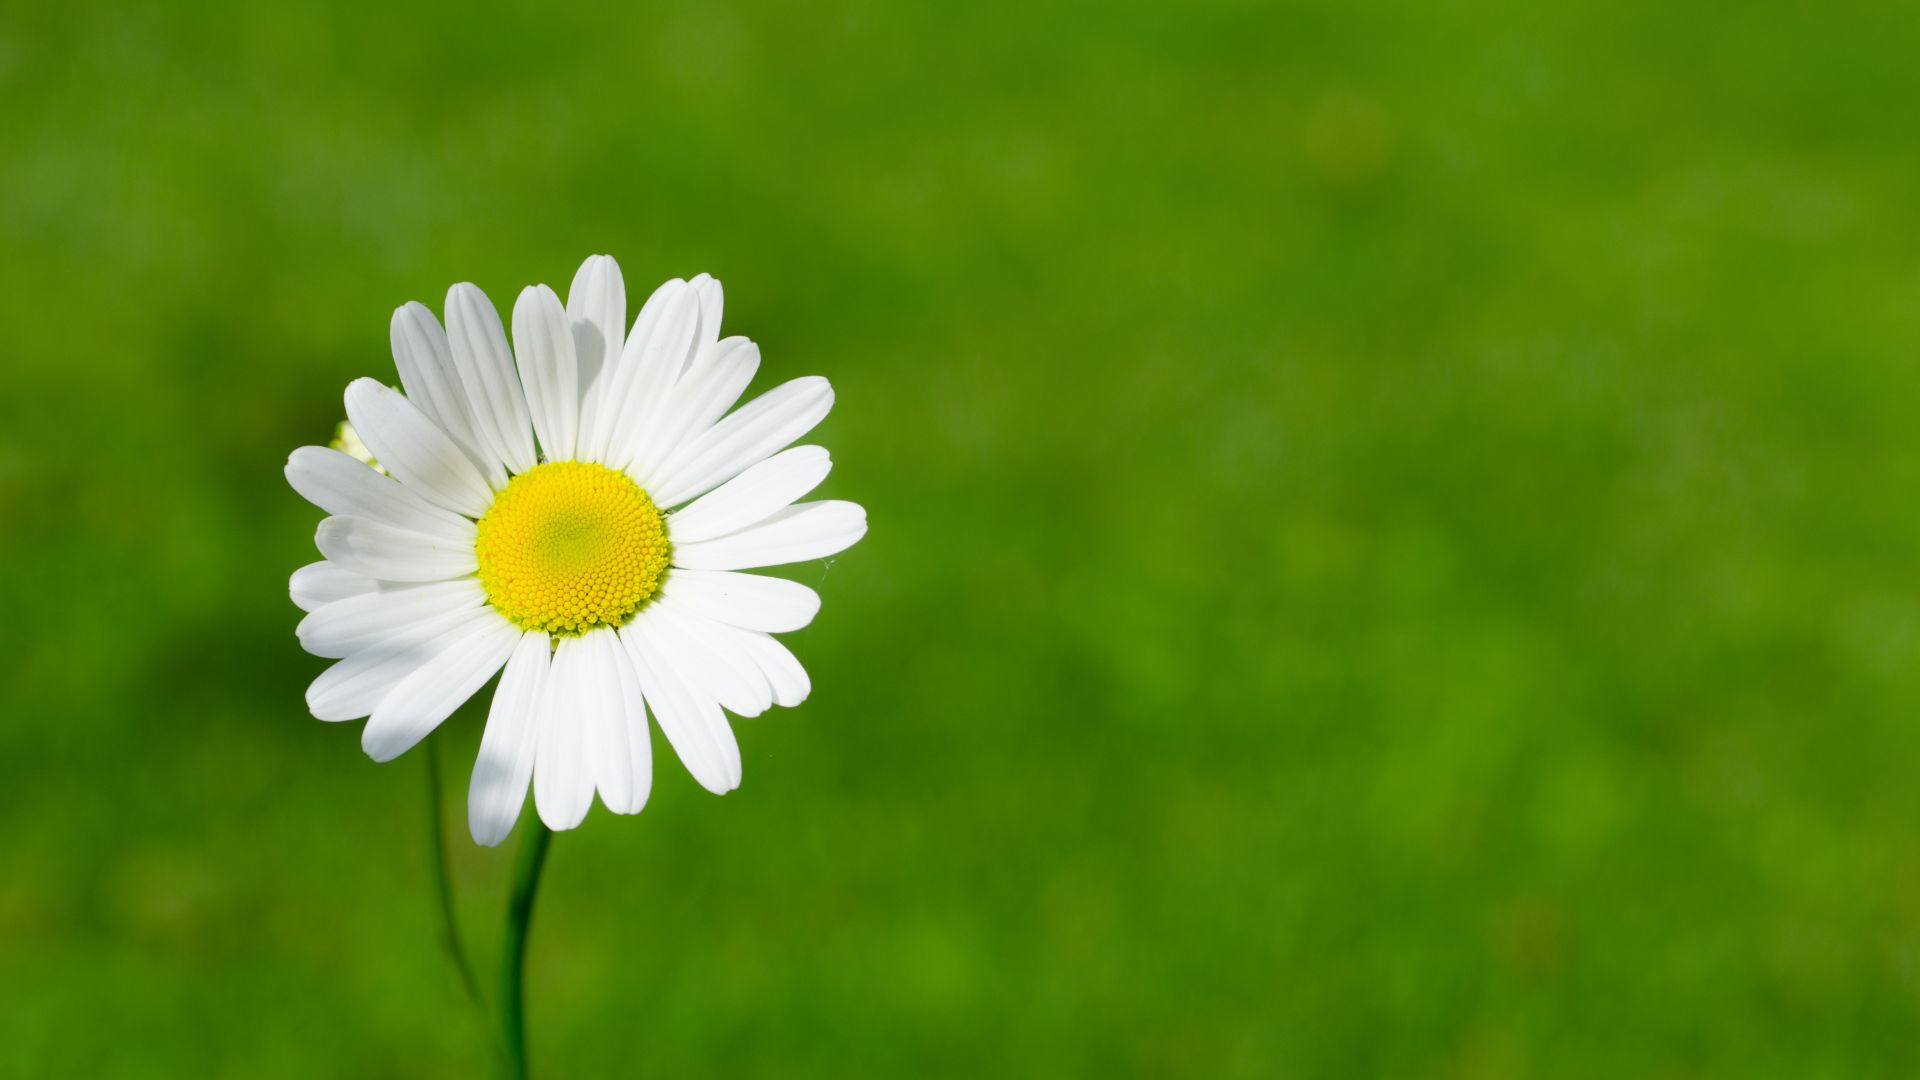 1920x1080 Desktop Wallpaper Daisy, Flowers, White Flowers, Spring, 4k, Hd Image, Picture, Background, E28a1f